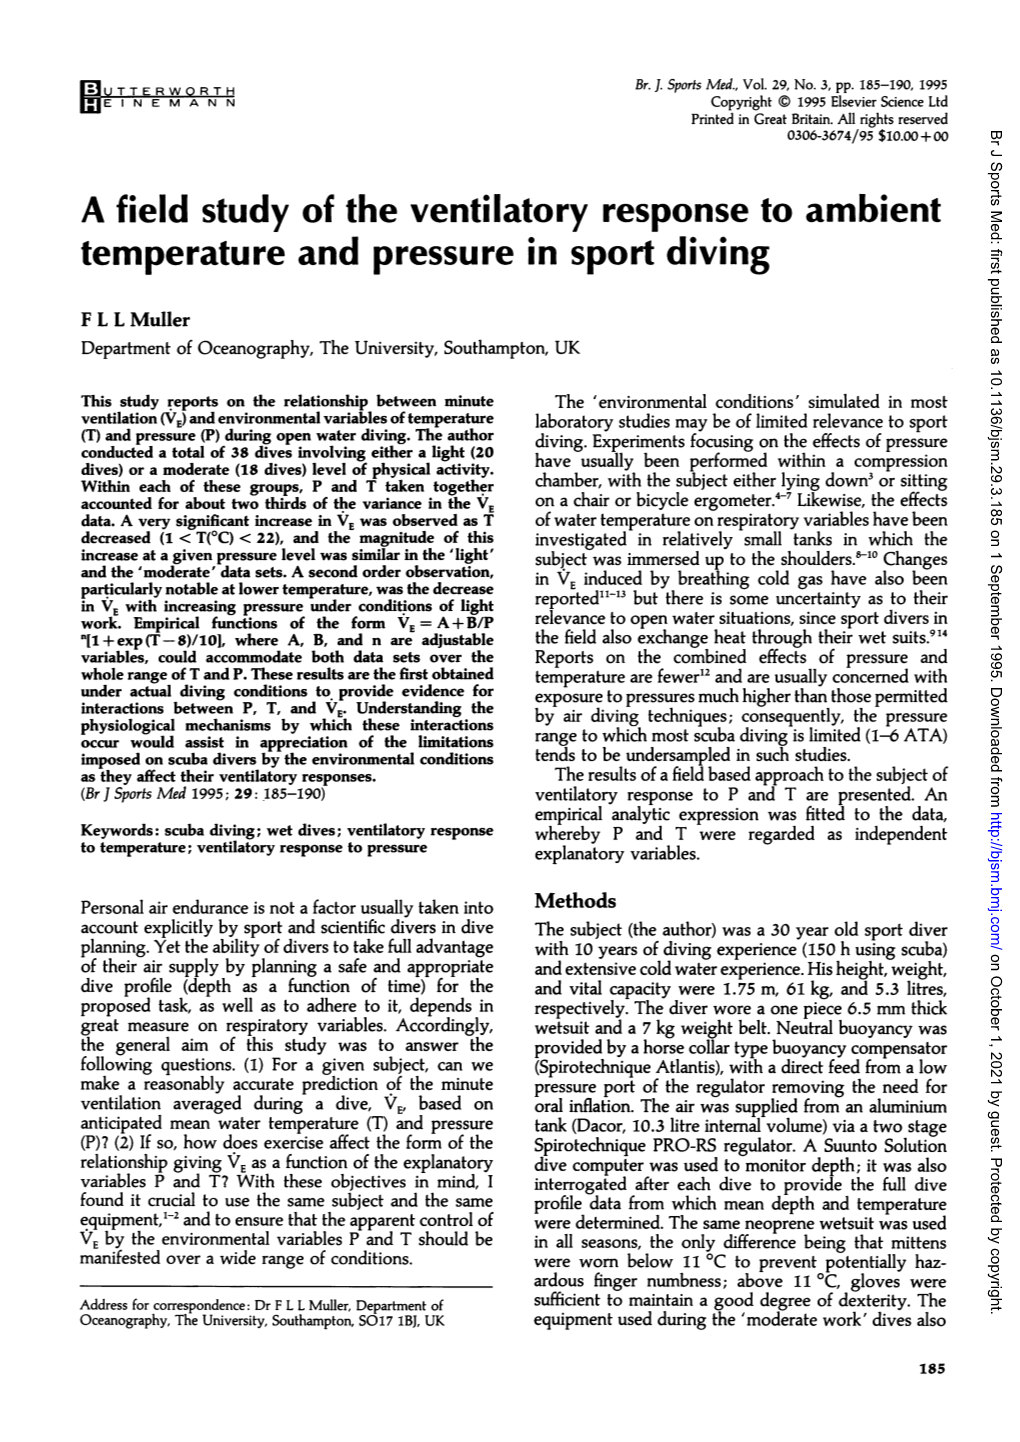 A Field Study of the Ventilatory Response to Ambient Temperature and Pressure in Sport Diving